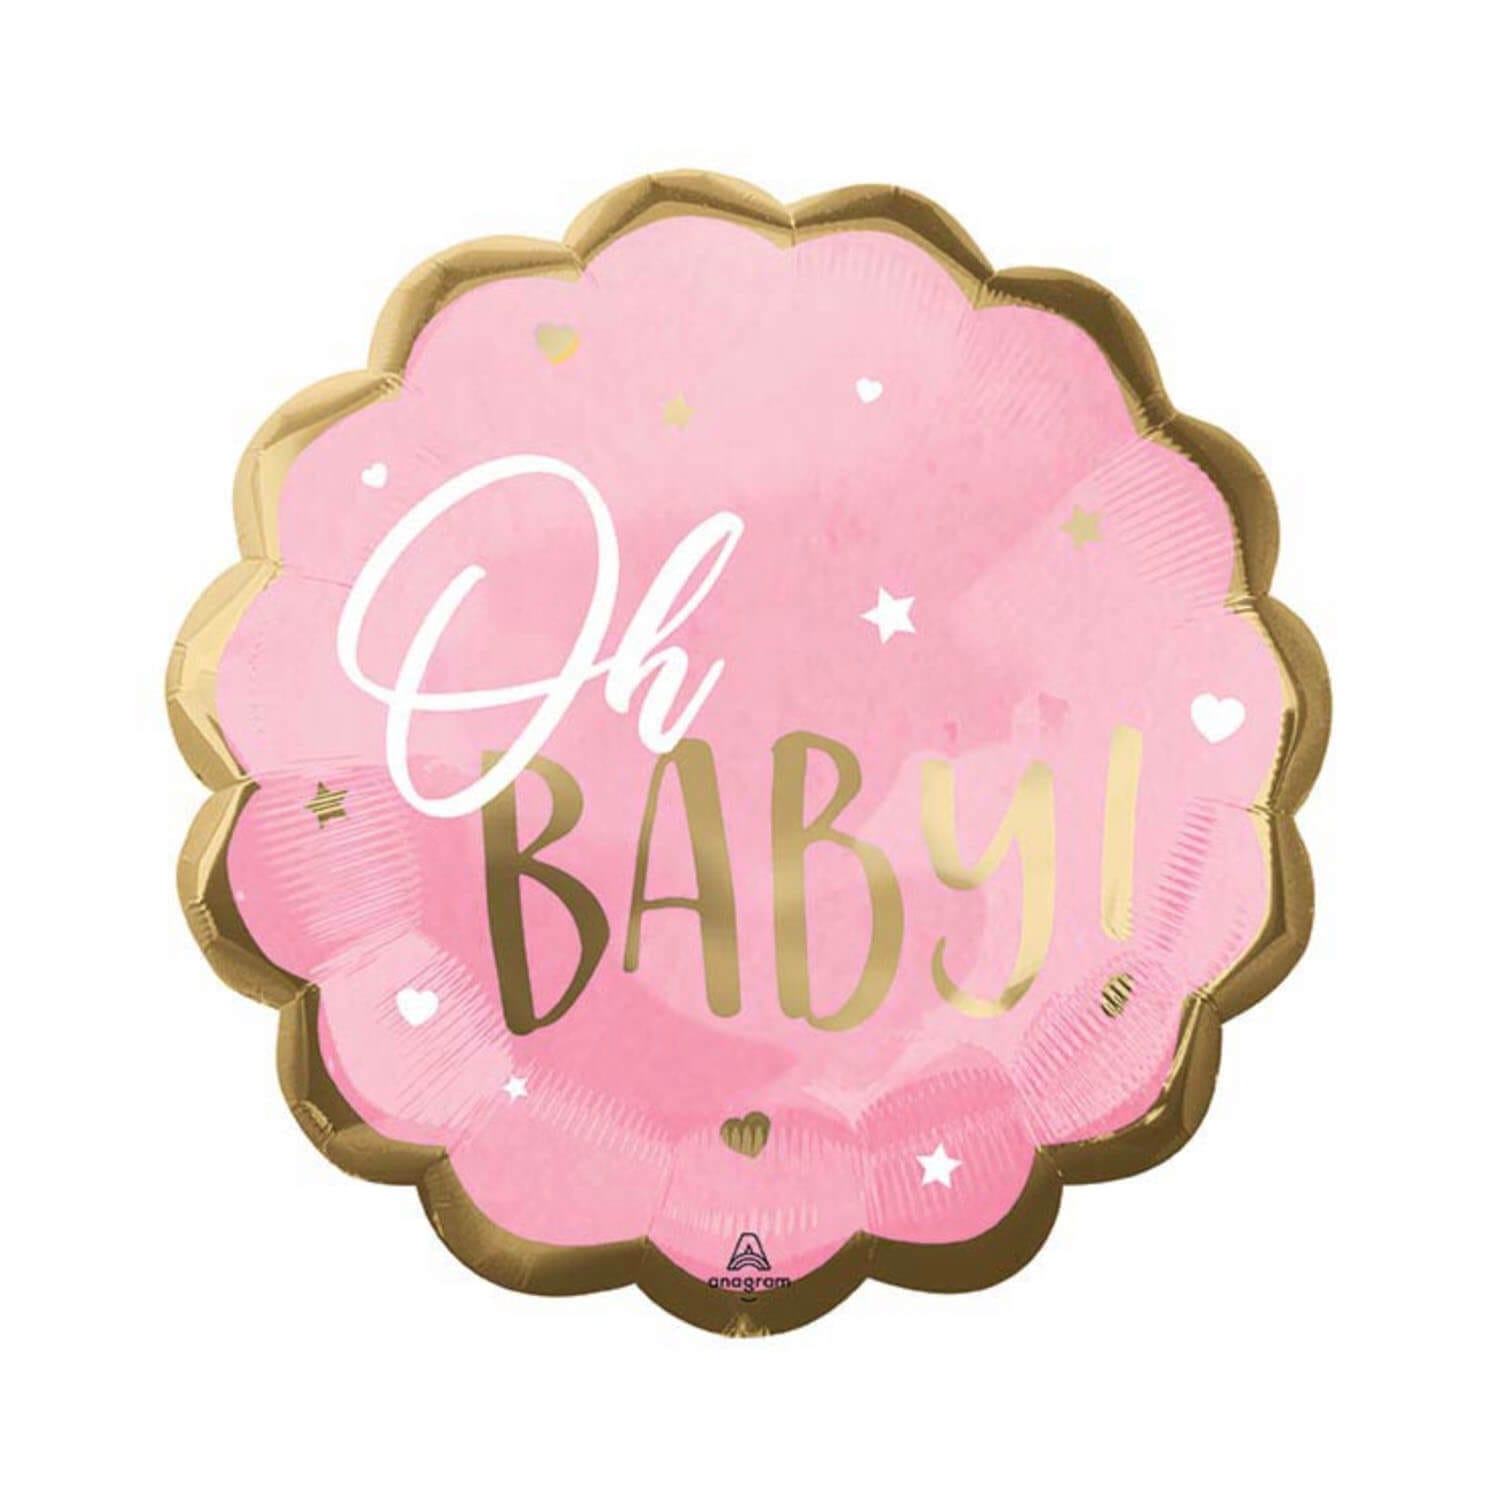 Pink oversized mylar helium balloon with gold script reading “Oh Baby” and a scalloped gold edge for your baby girl from Just Peachy.